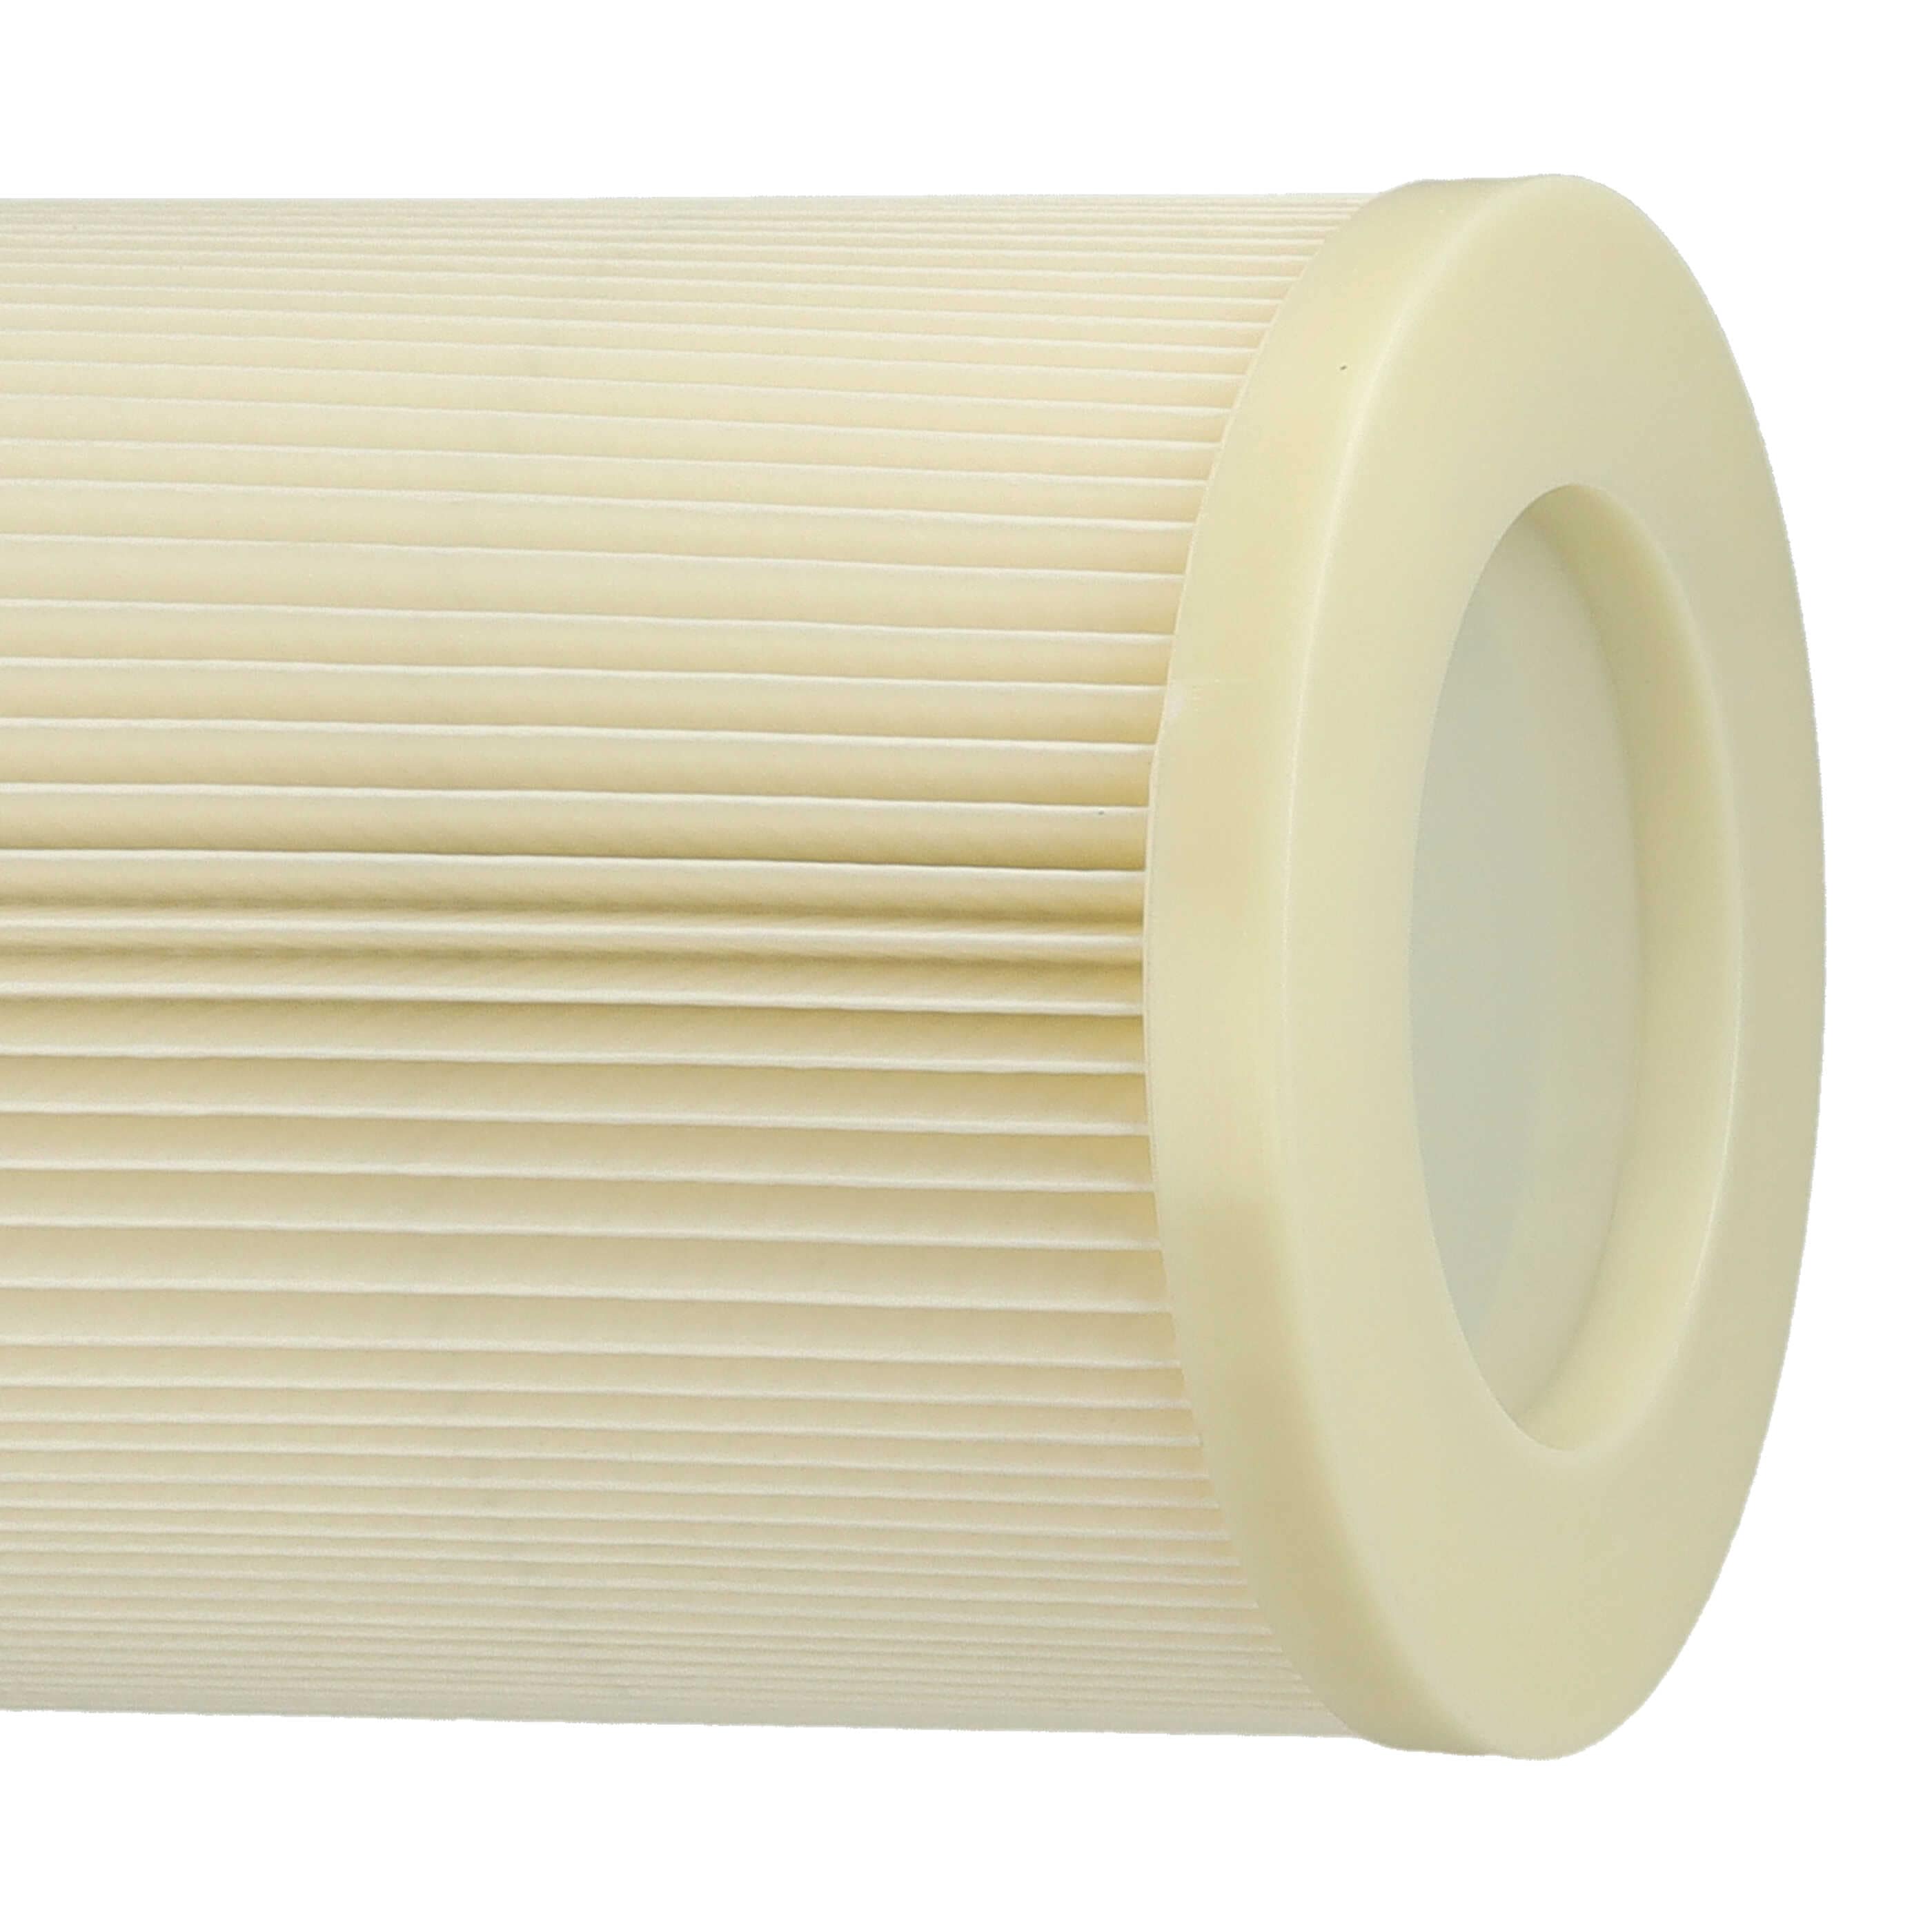 1x fine filter replaces Dustcontrol 42029 for Dustcontrol Vacuum Cleaner, white